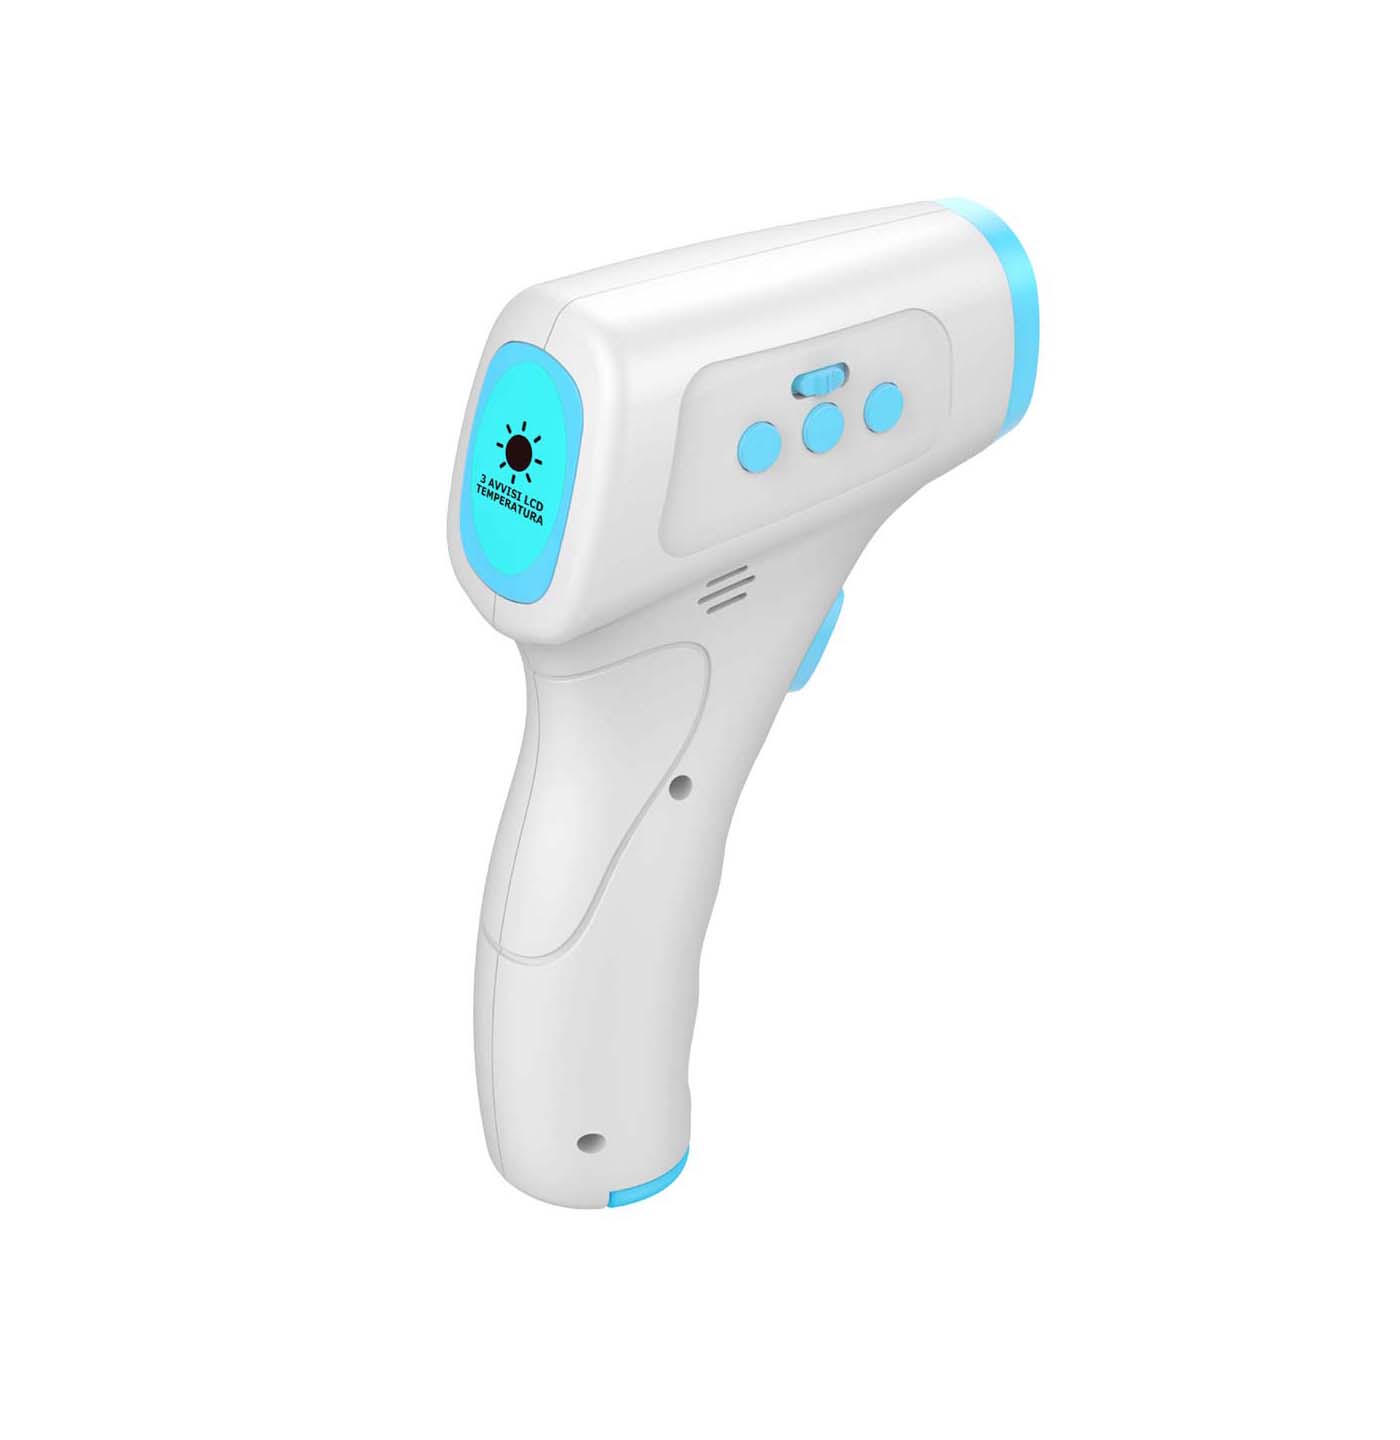 TECHMADE TERMOSCANNER INFRARED